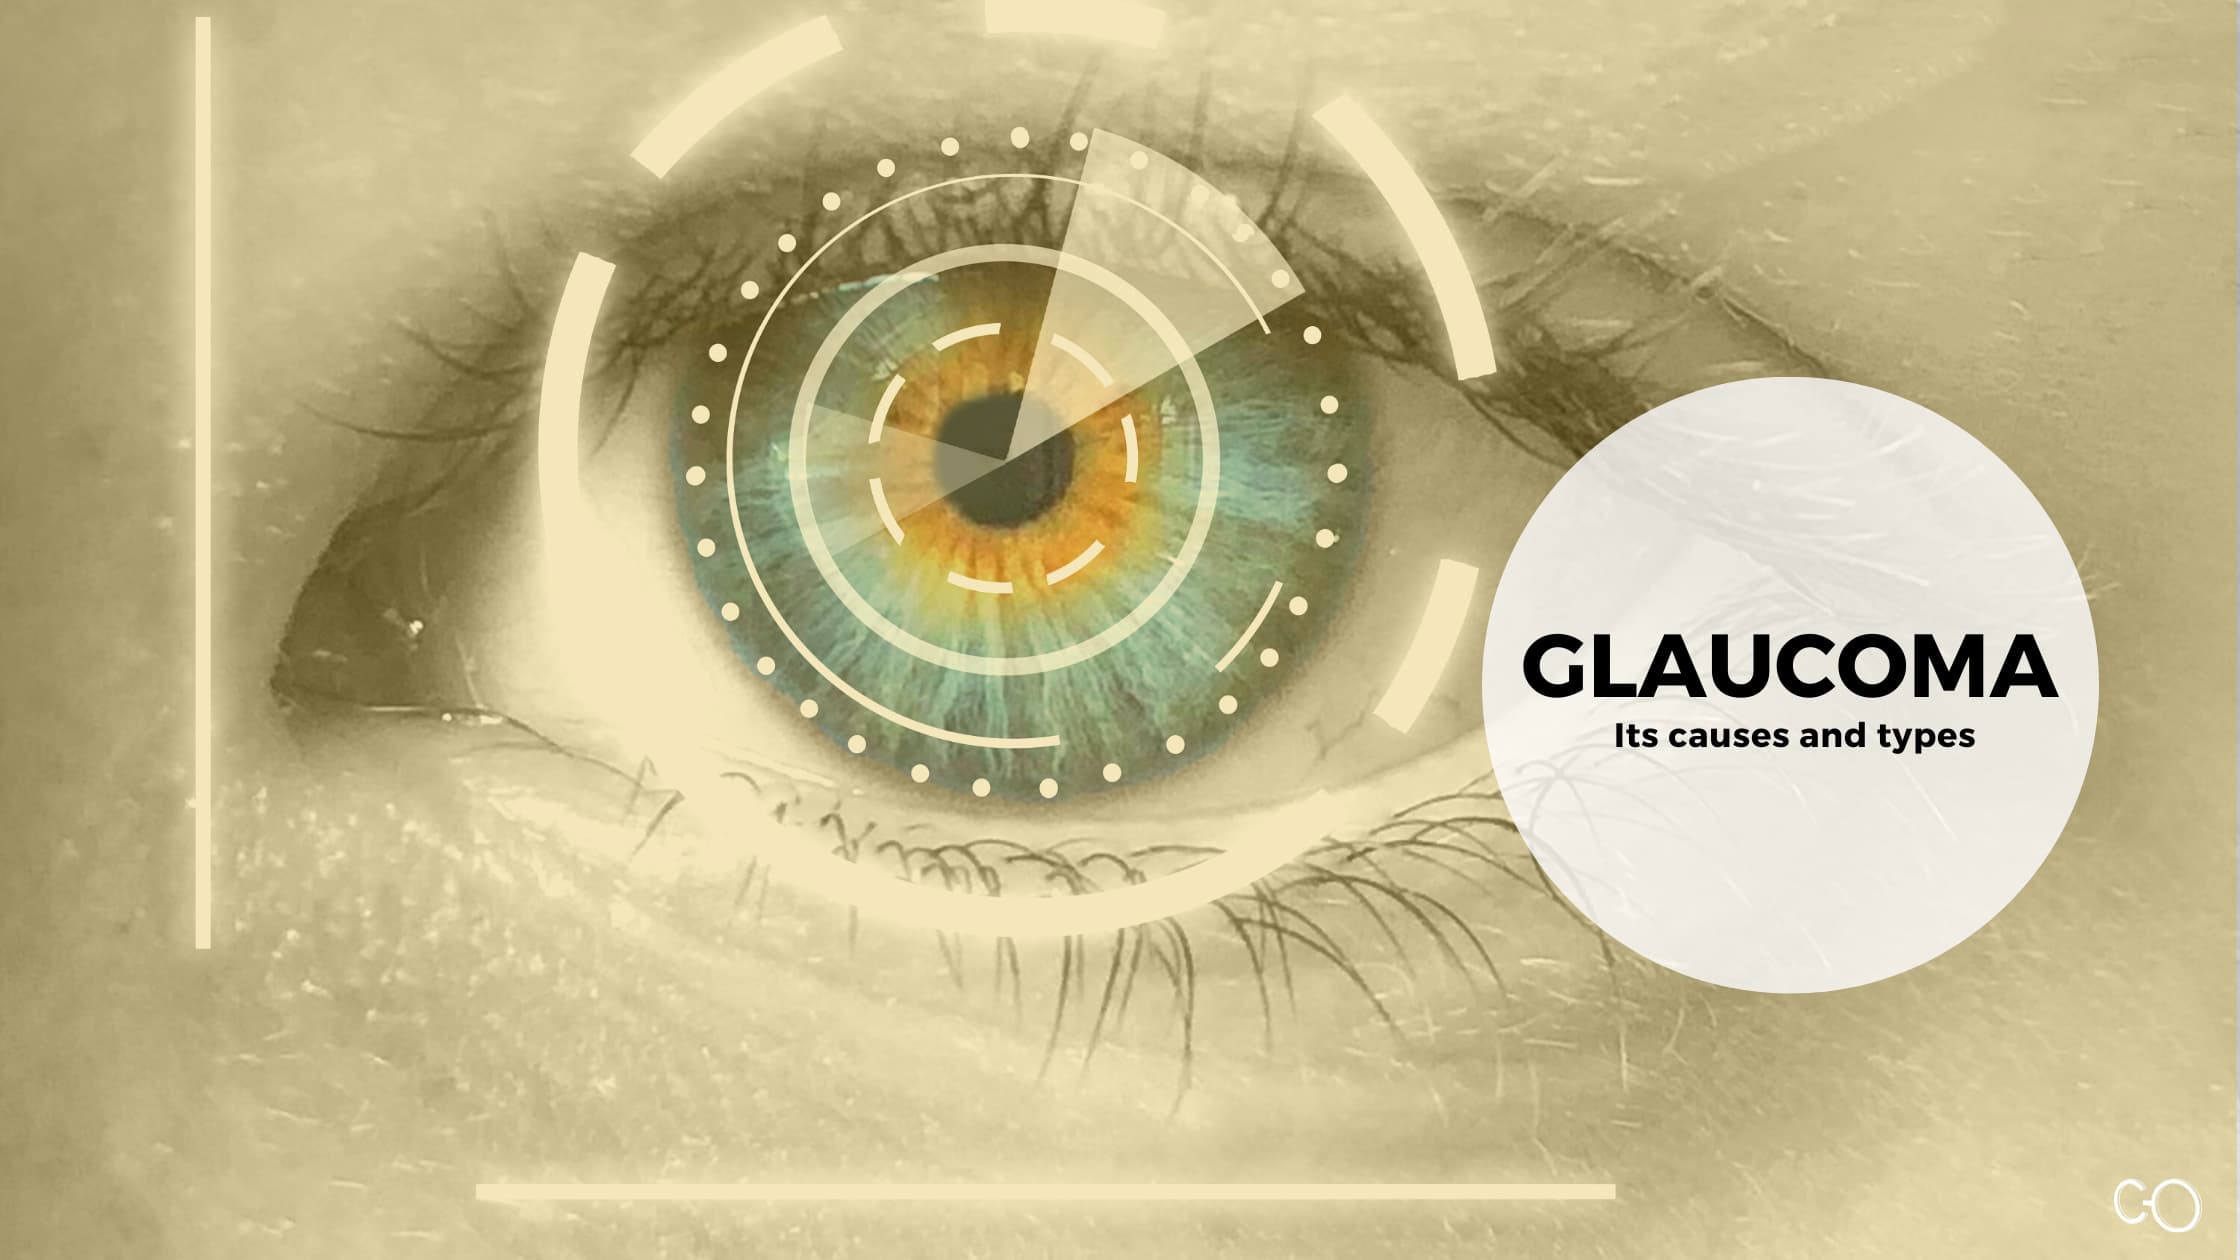 The causes and types of glaucoma